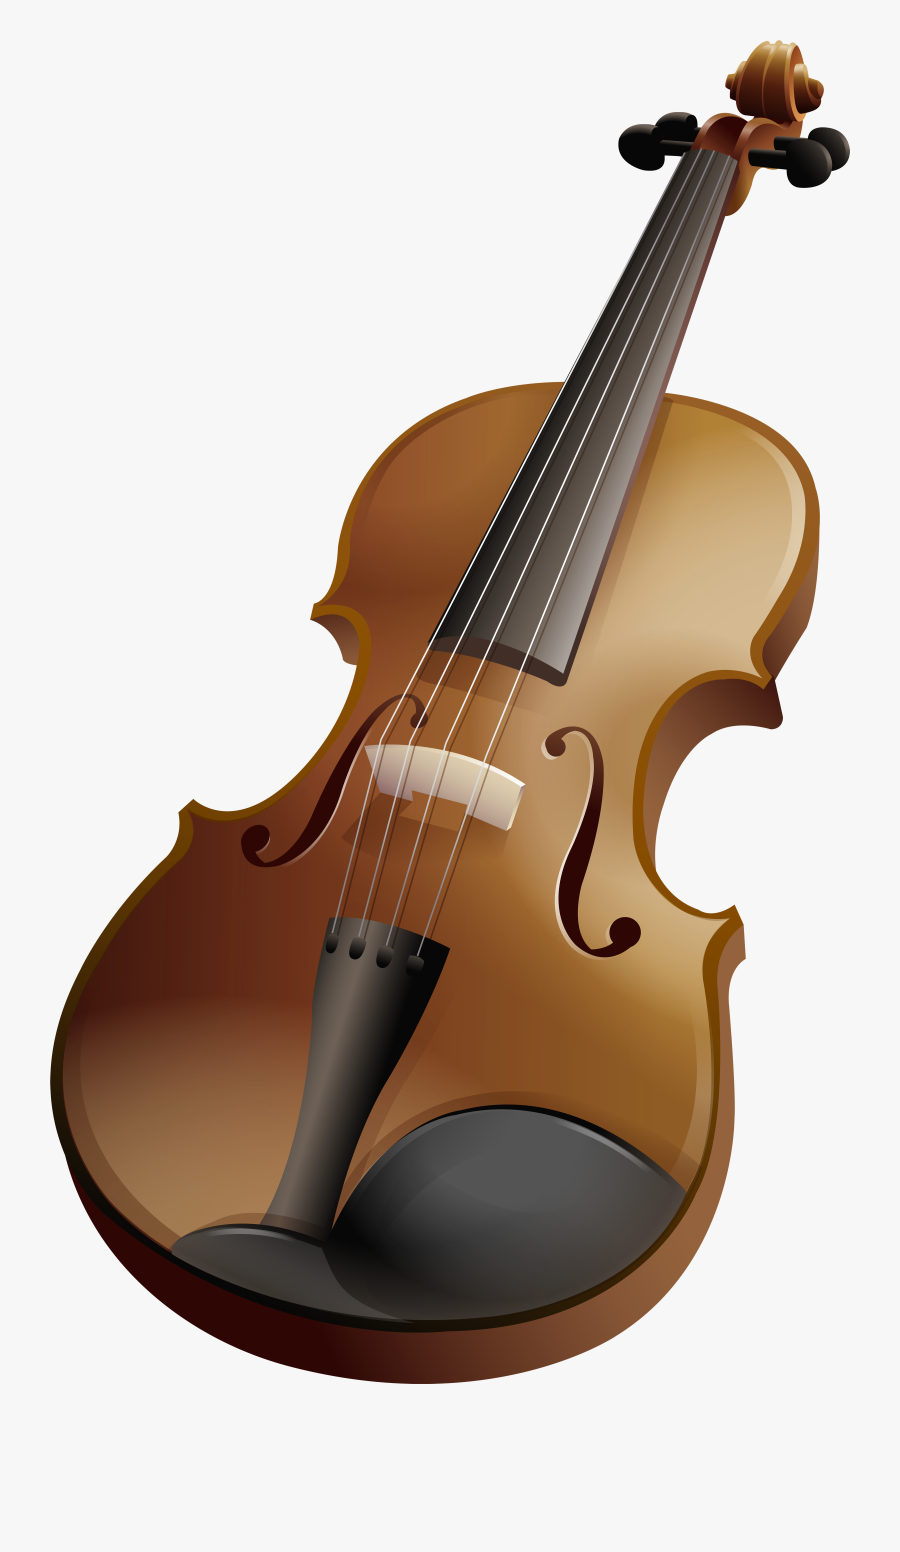 Violin Family Musical Instruments Double Bass Cello - Violin Png Clipart, Transparent Clipart